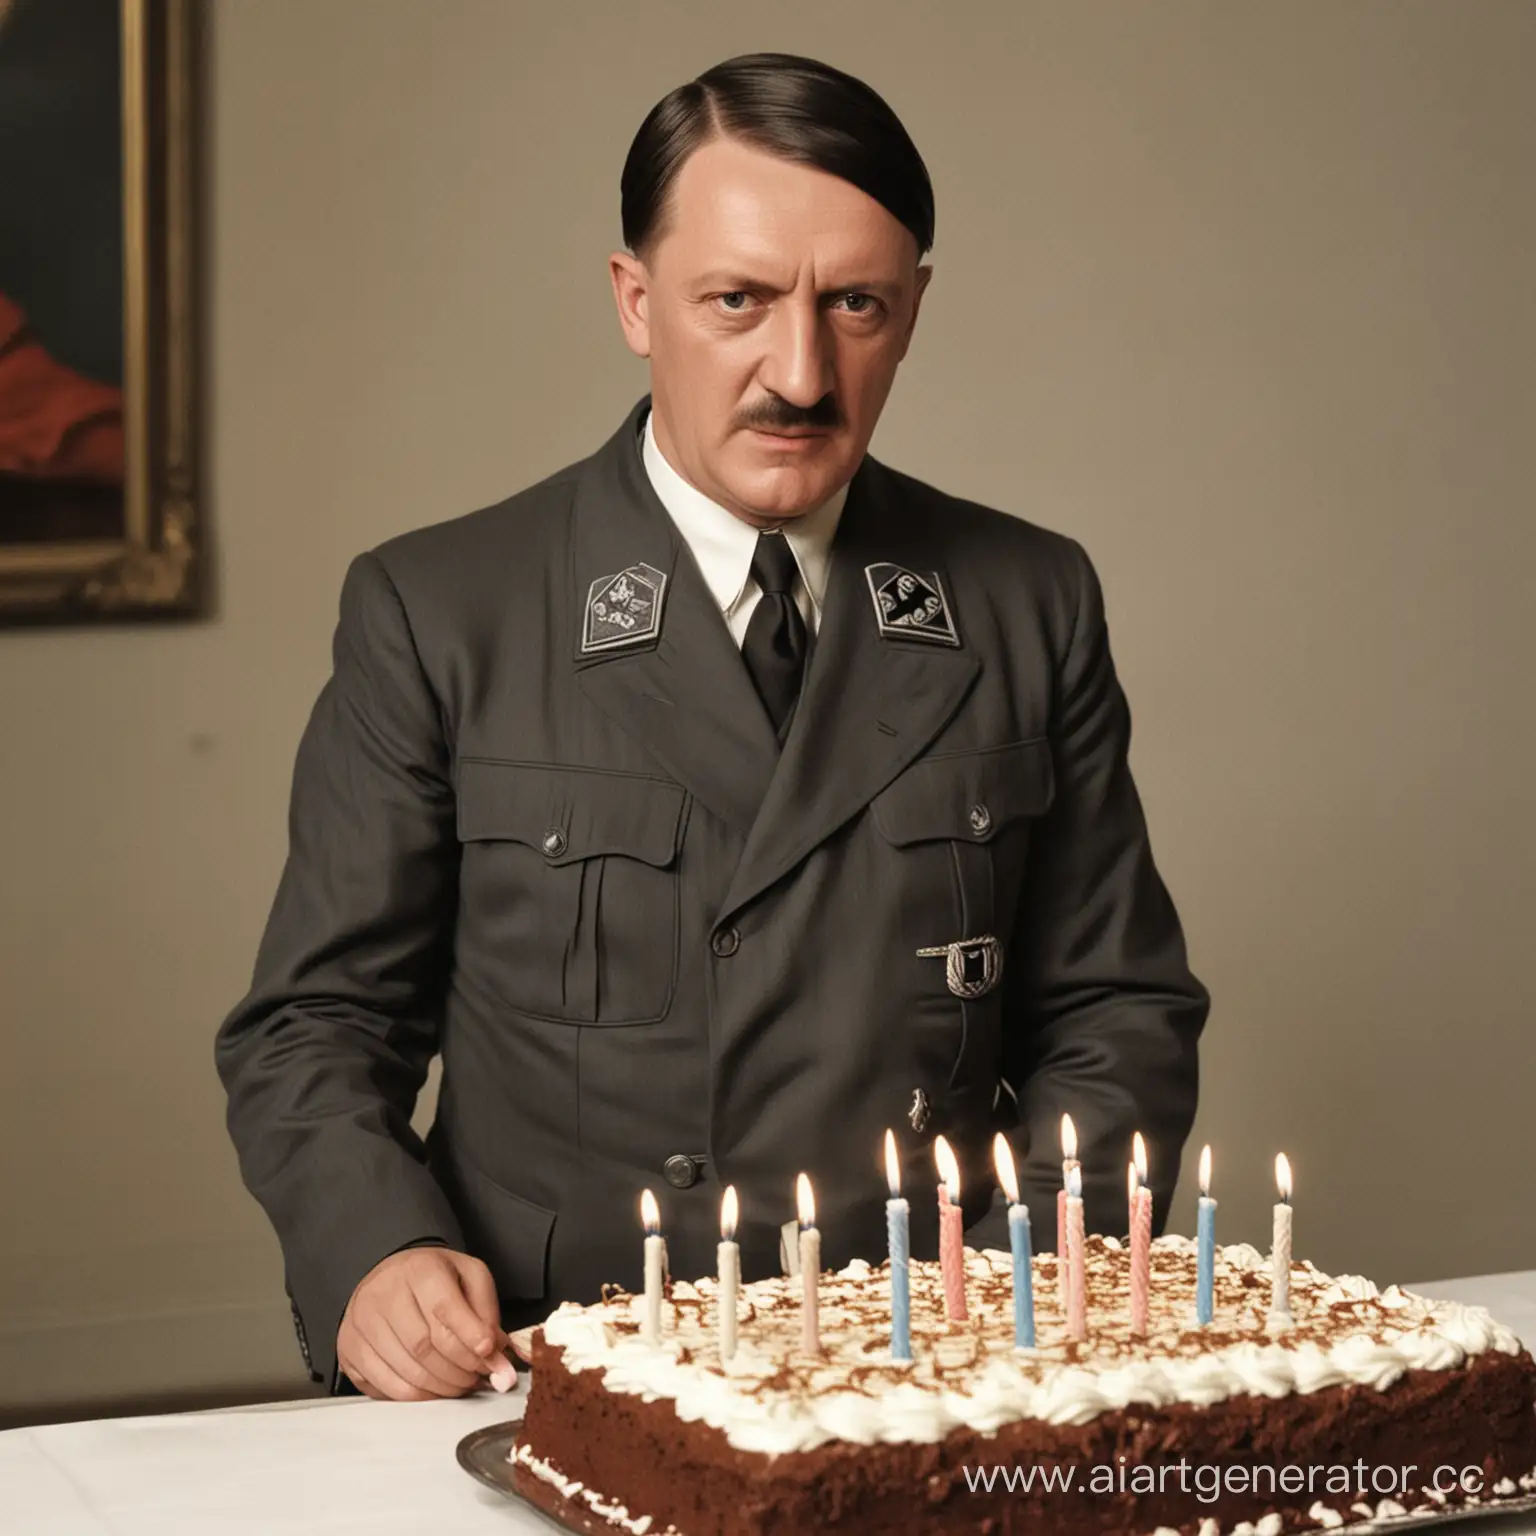 Celebrating-Hitlers-Birthday-with-Controversial-Parody-Cake